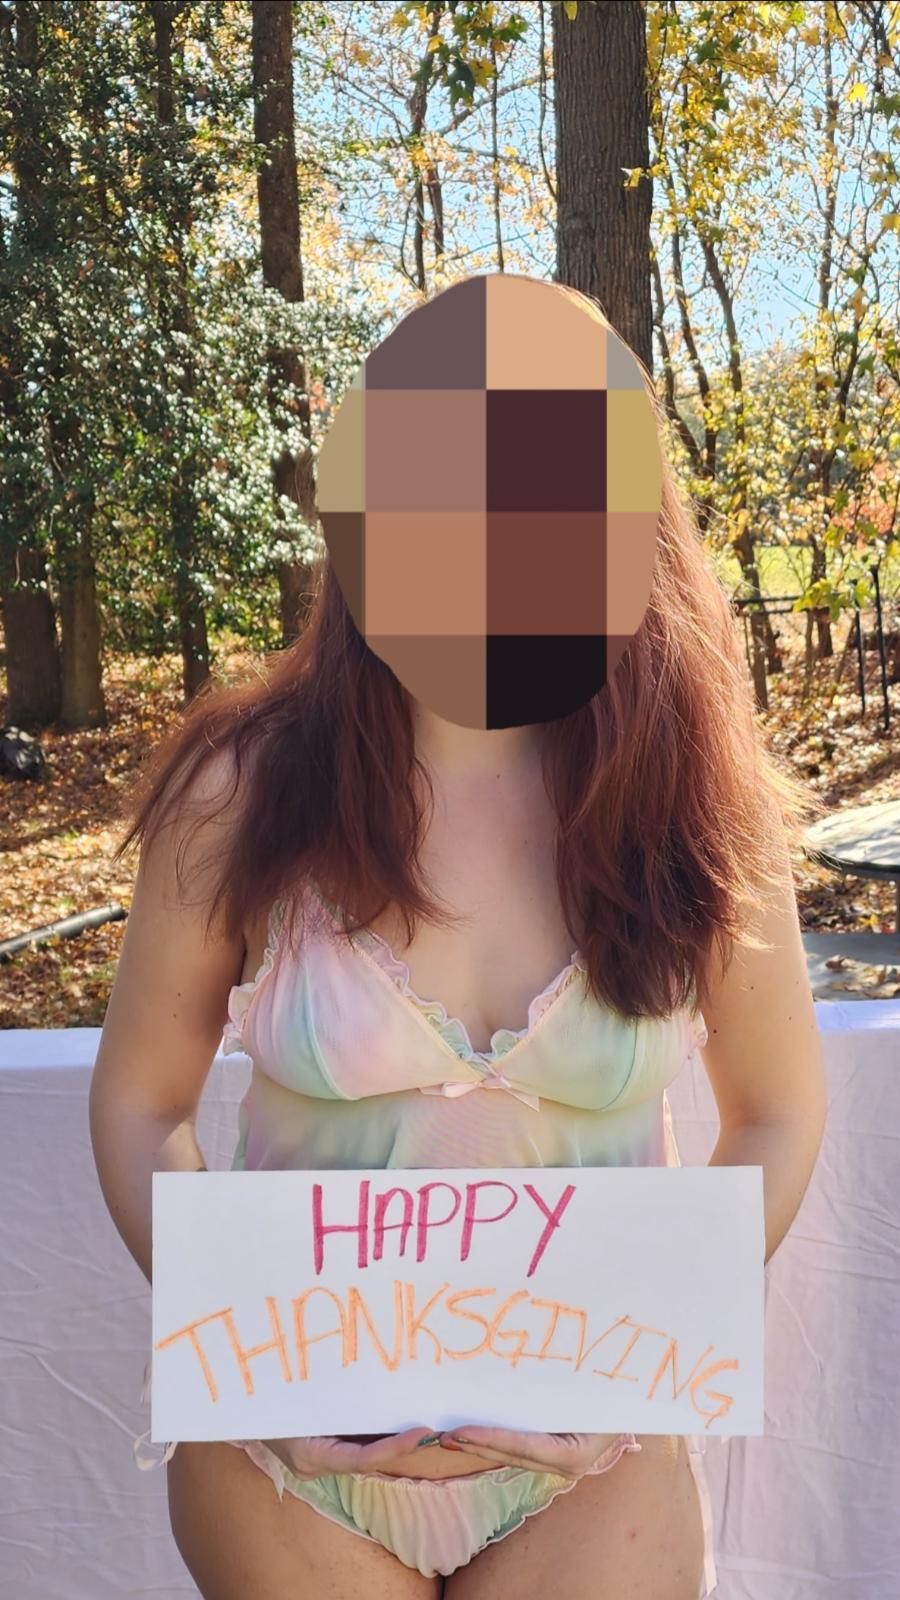 Sexy GF with a Sexy Thanksgiving Message